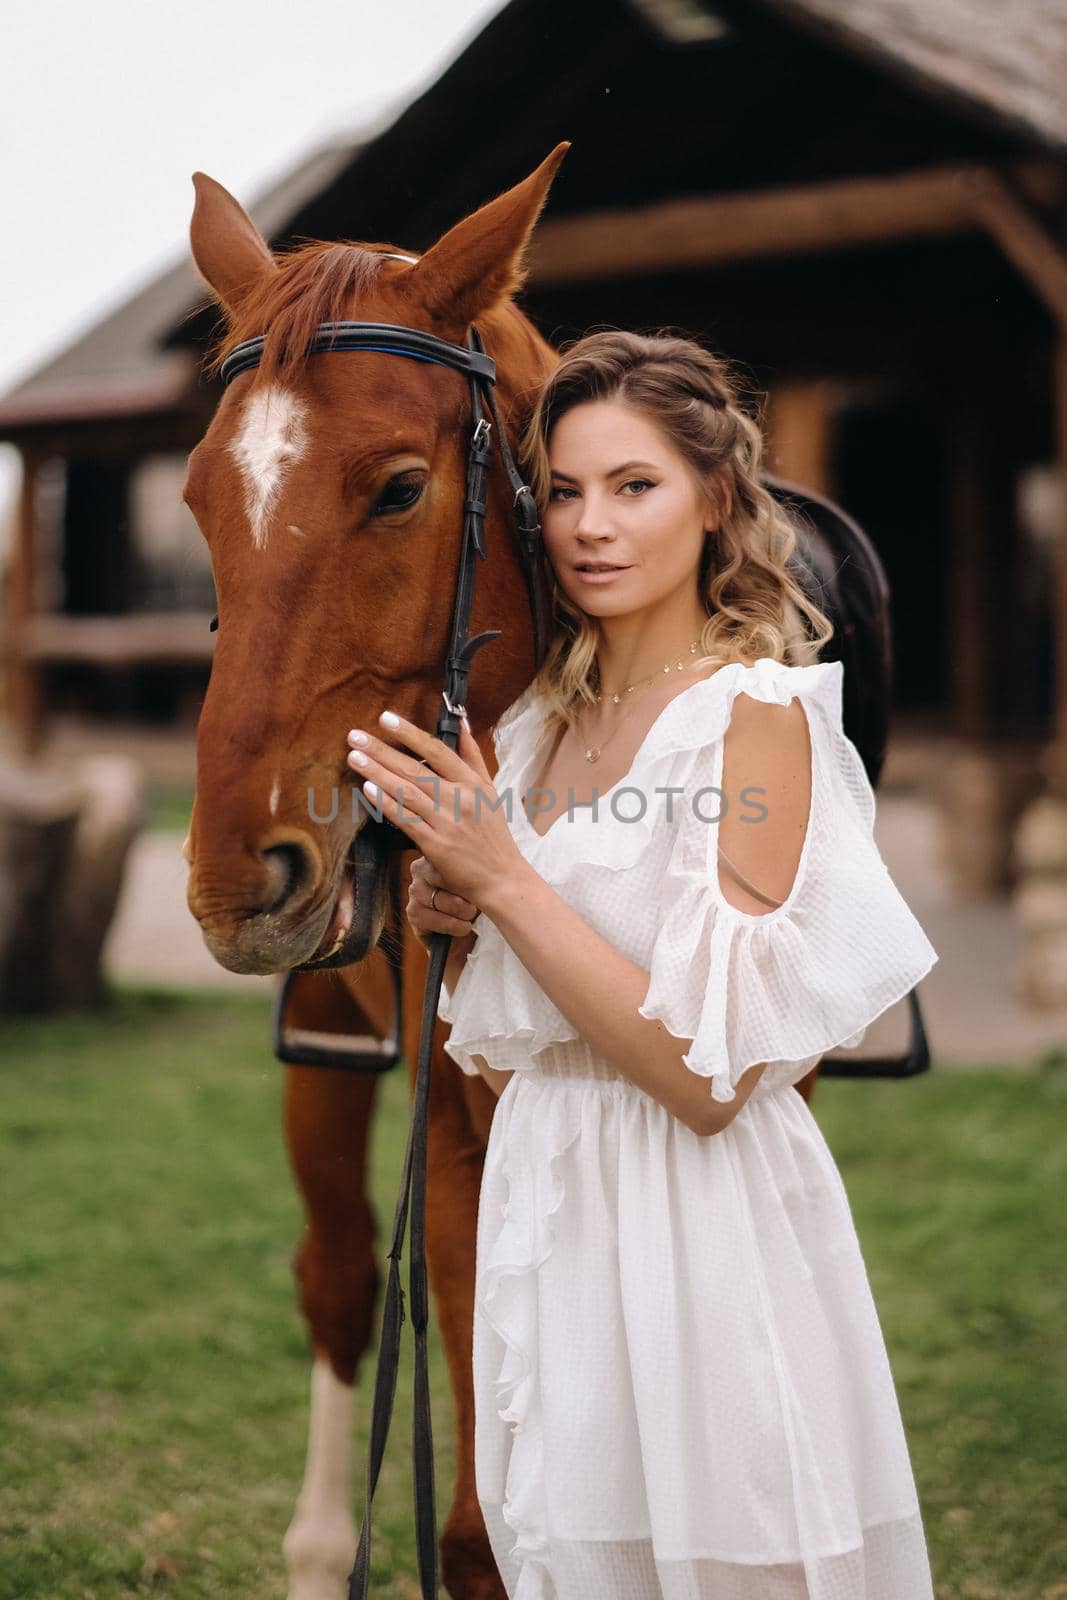 Beautiful girl in a white sundress next to a horse on an old ranch by Lobachad